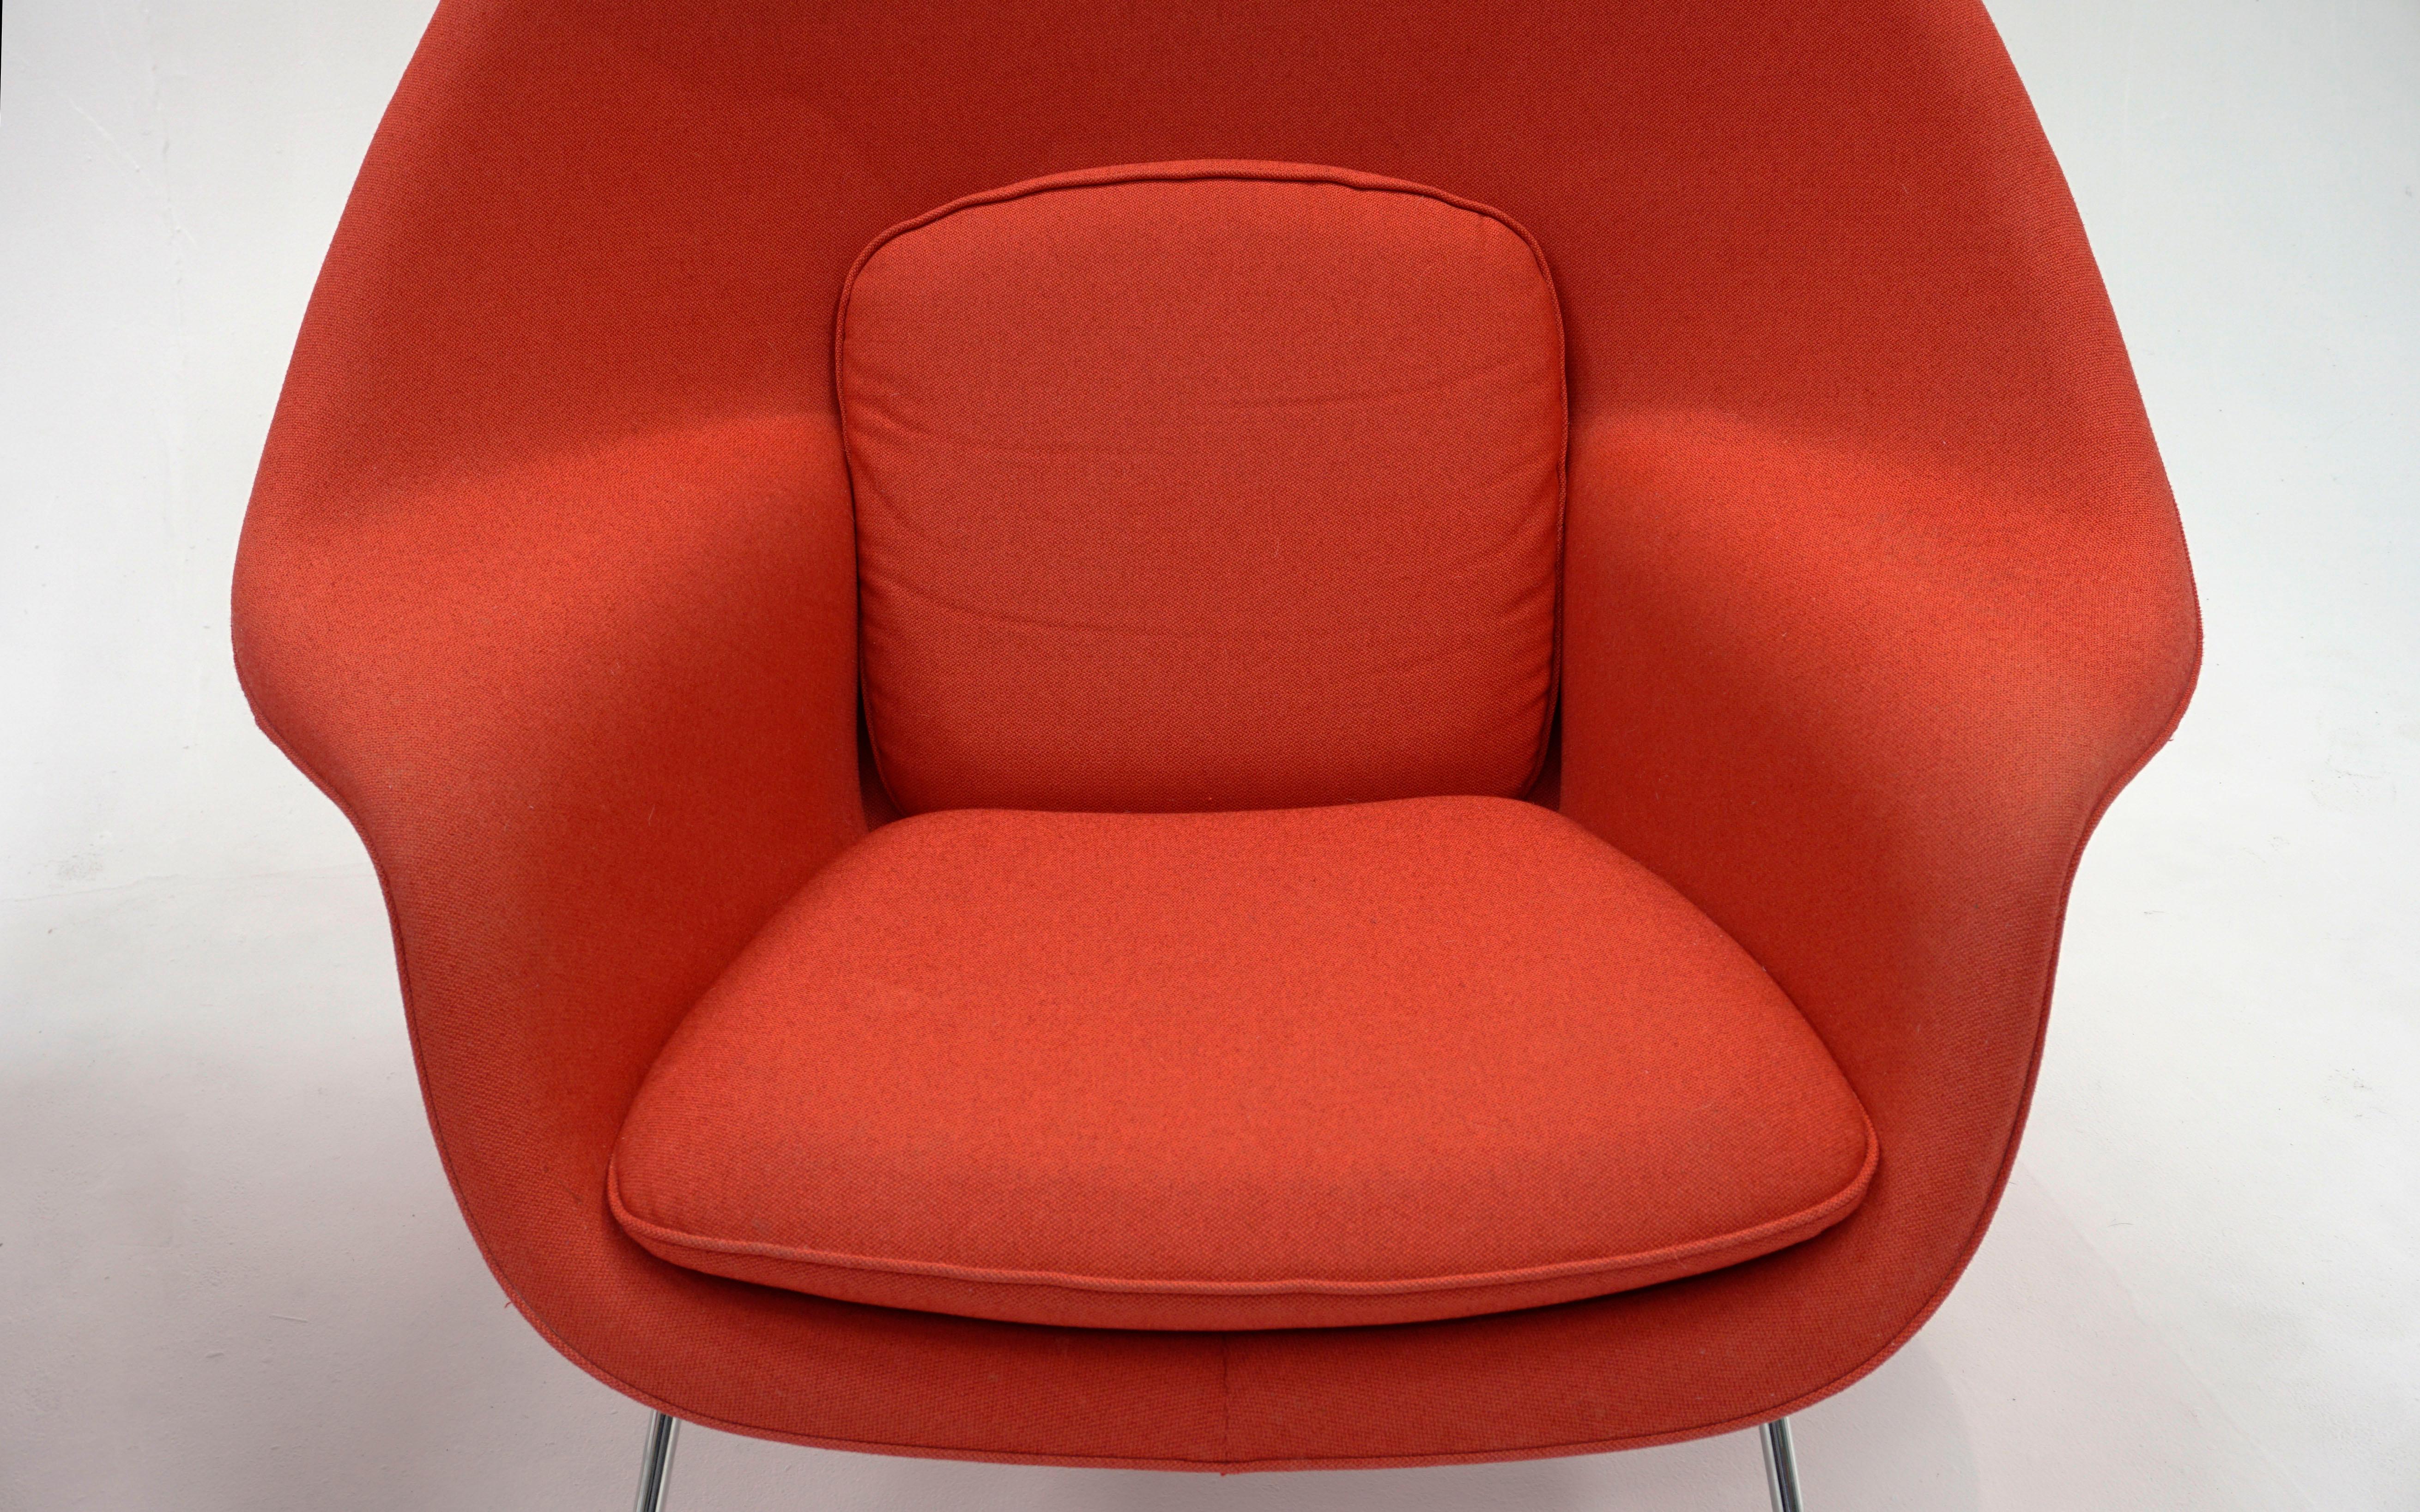 American Pair Saarinen Womb Chairs for Knoll in Red with Chrome Frames, Ready to Use